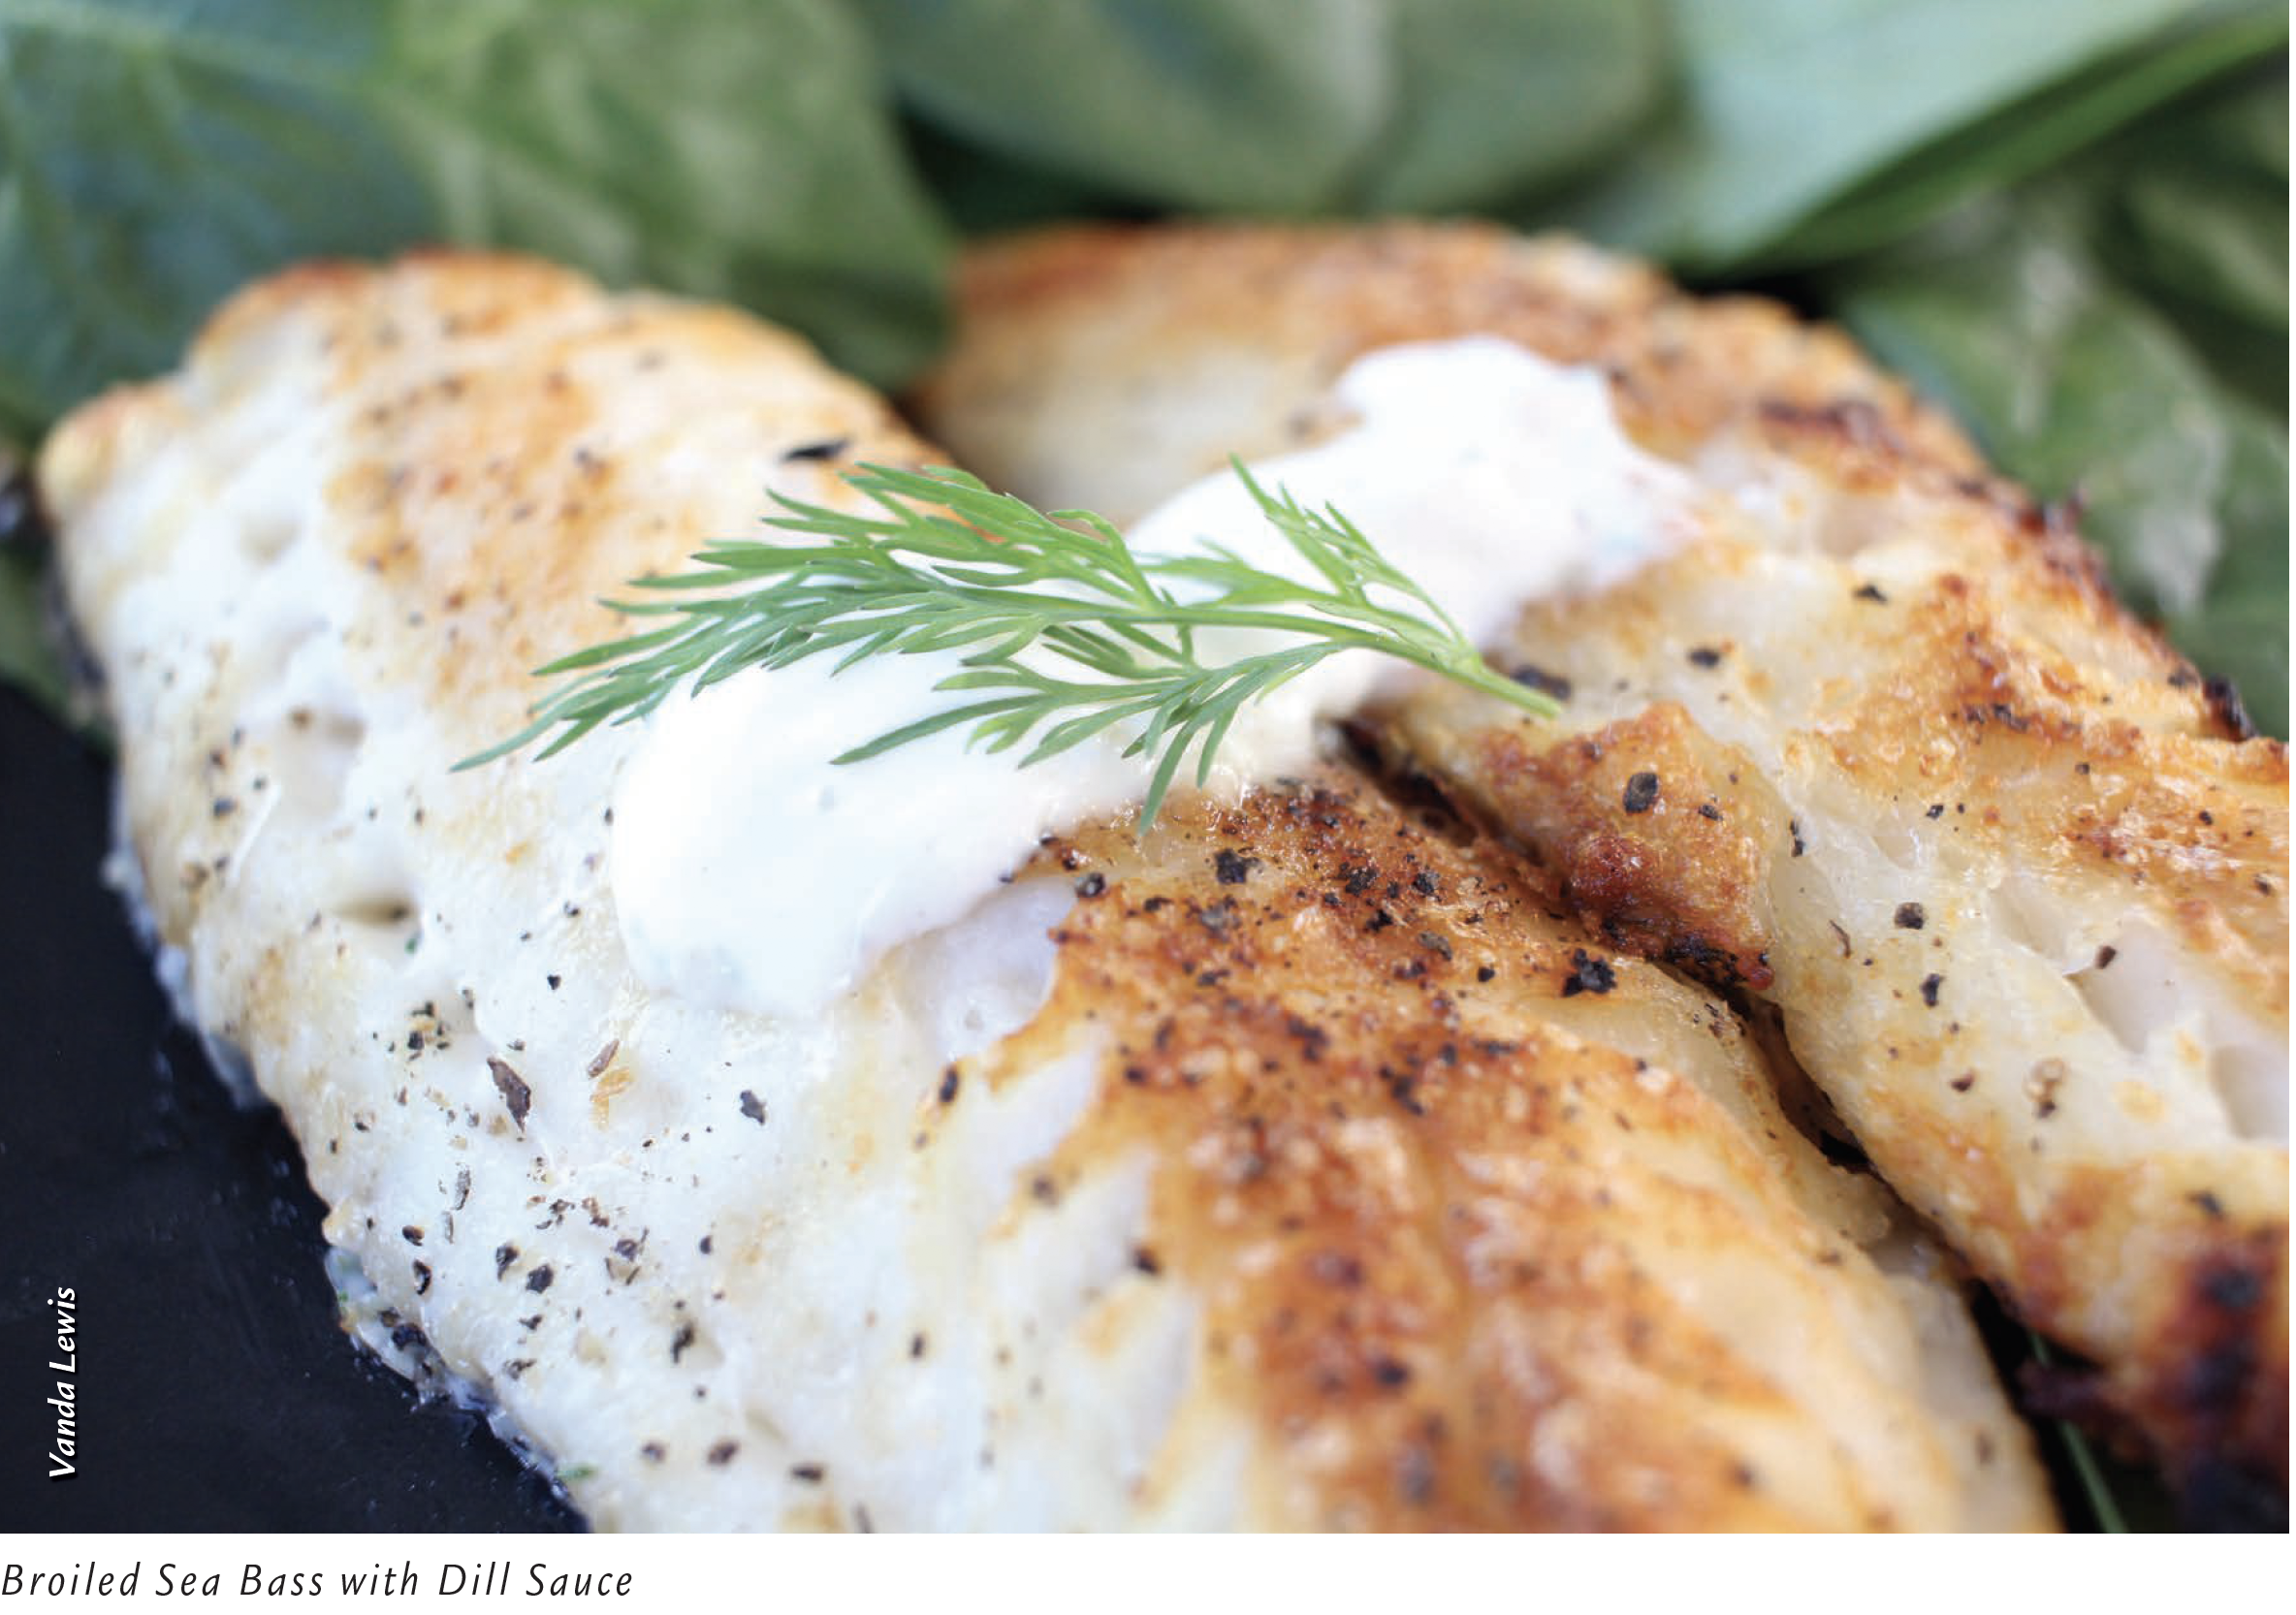 Broiled Sea Bass with Dill Sauce